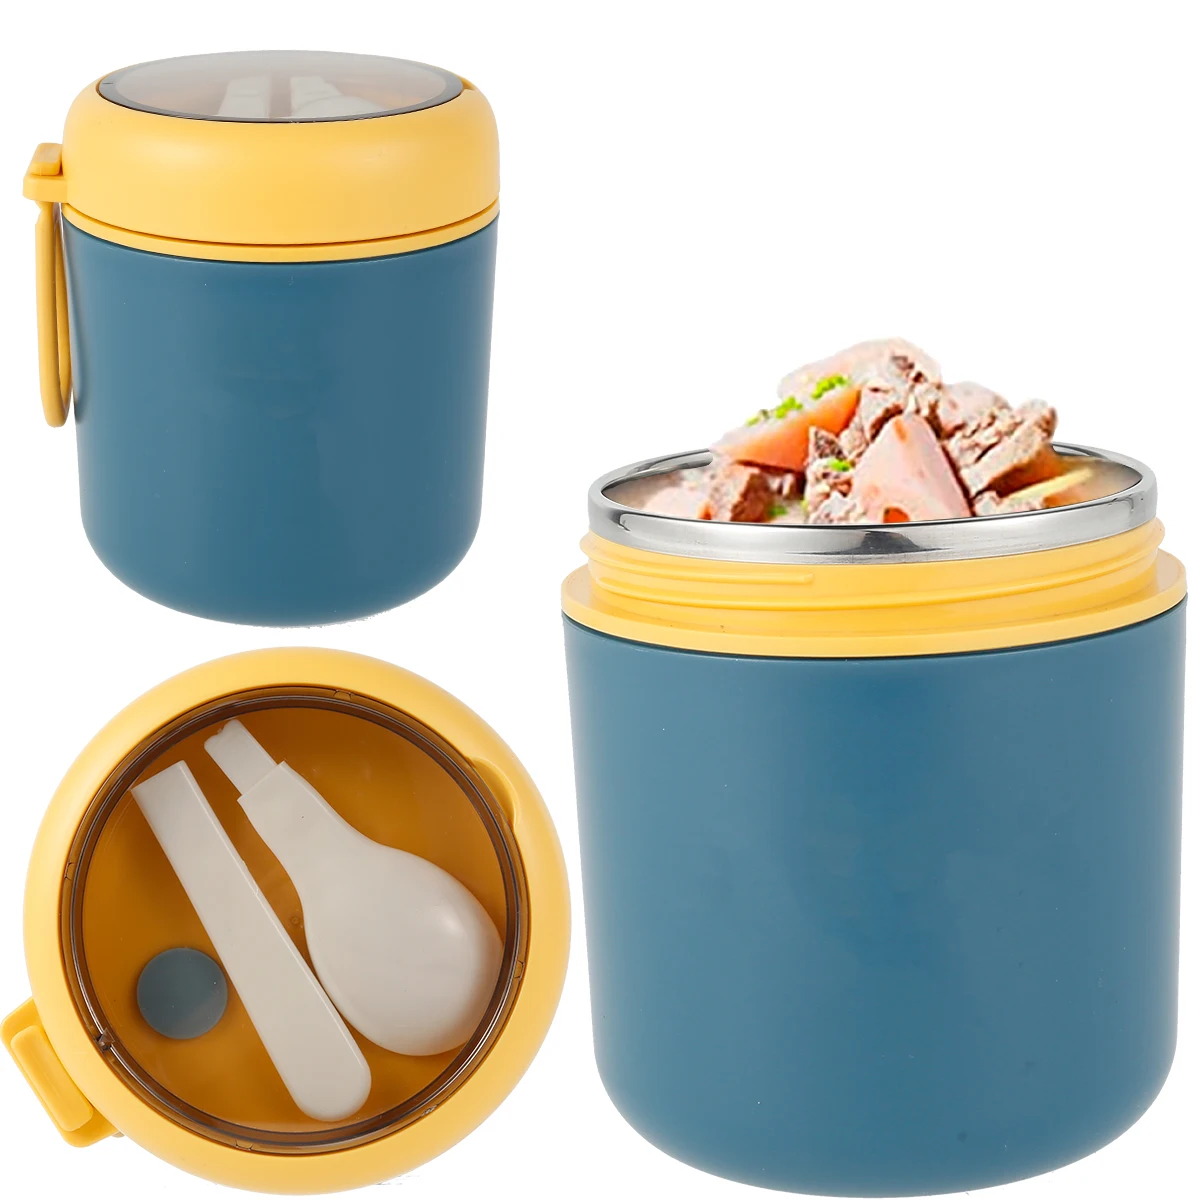 https://ae01.alicdn.com/kf/S30886a5885f84d61b3c77fde4eae0144N/Lunch-Box-Insulated-Food-Container-Stainless-Steel-Drinking-Cup-With-Spoon-Soup-Portable-Lunch-Thermoses-with.jpg